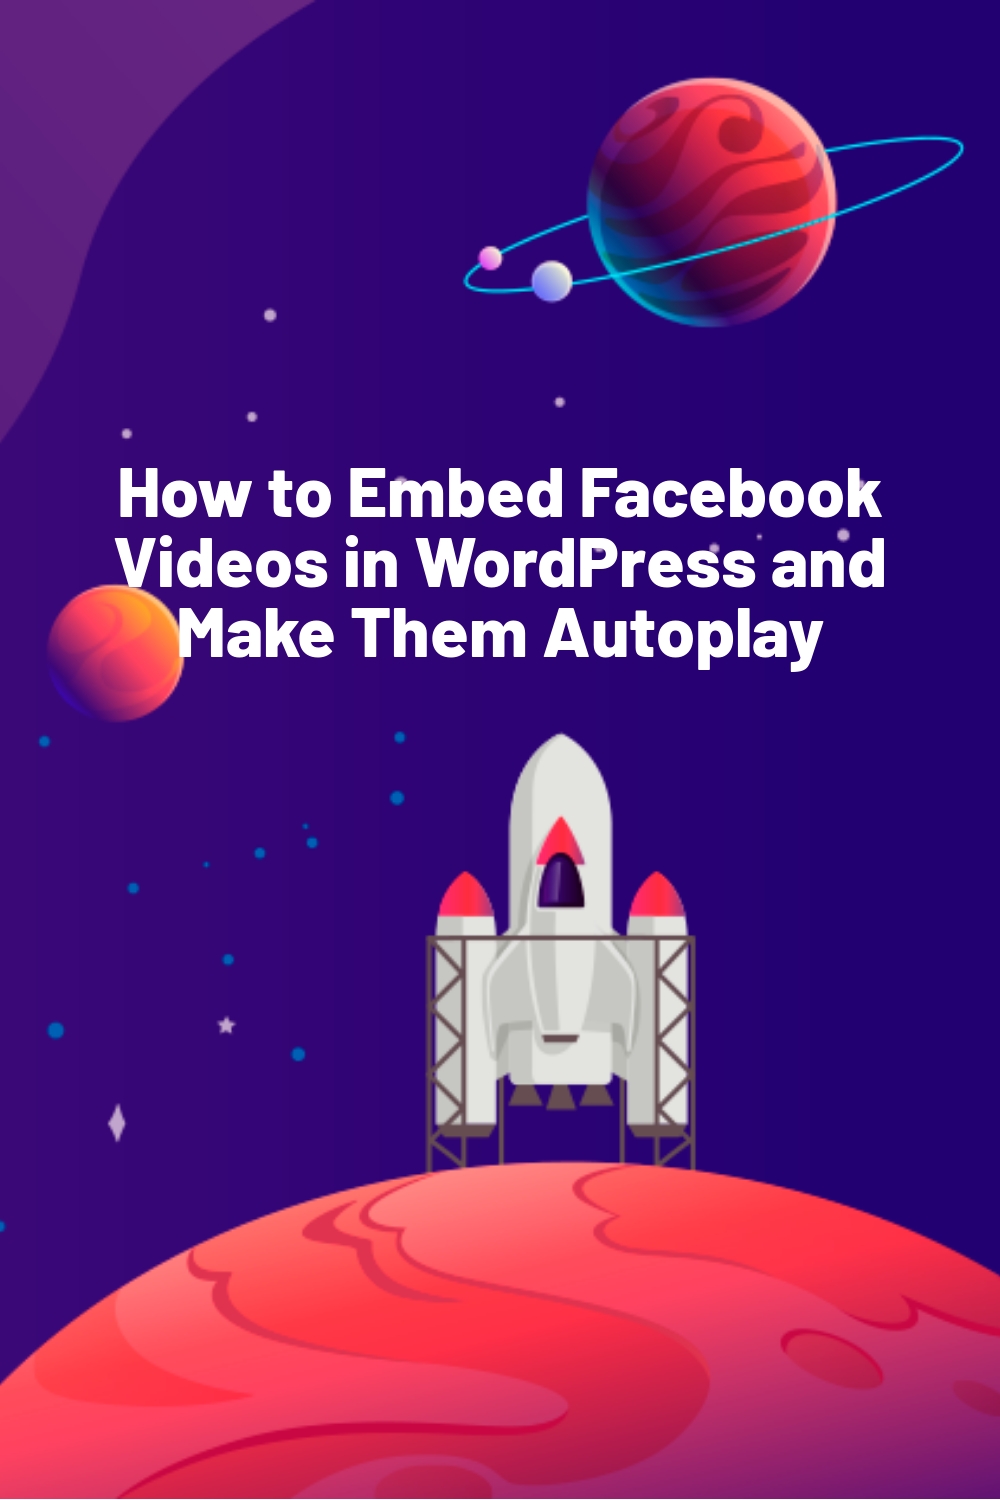 How to Embed Facebook Videos in WordPress and Make Them Autoplay